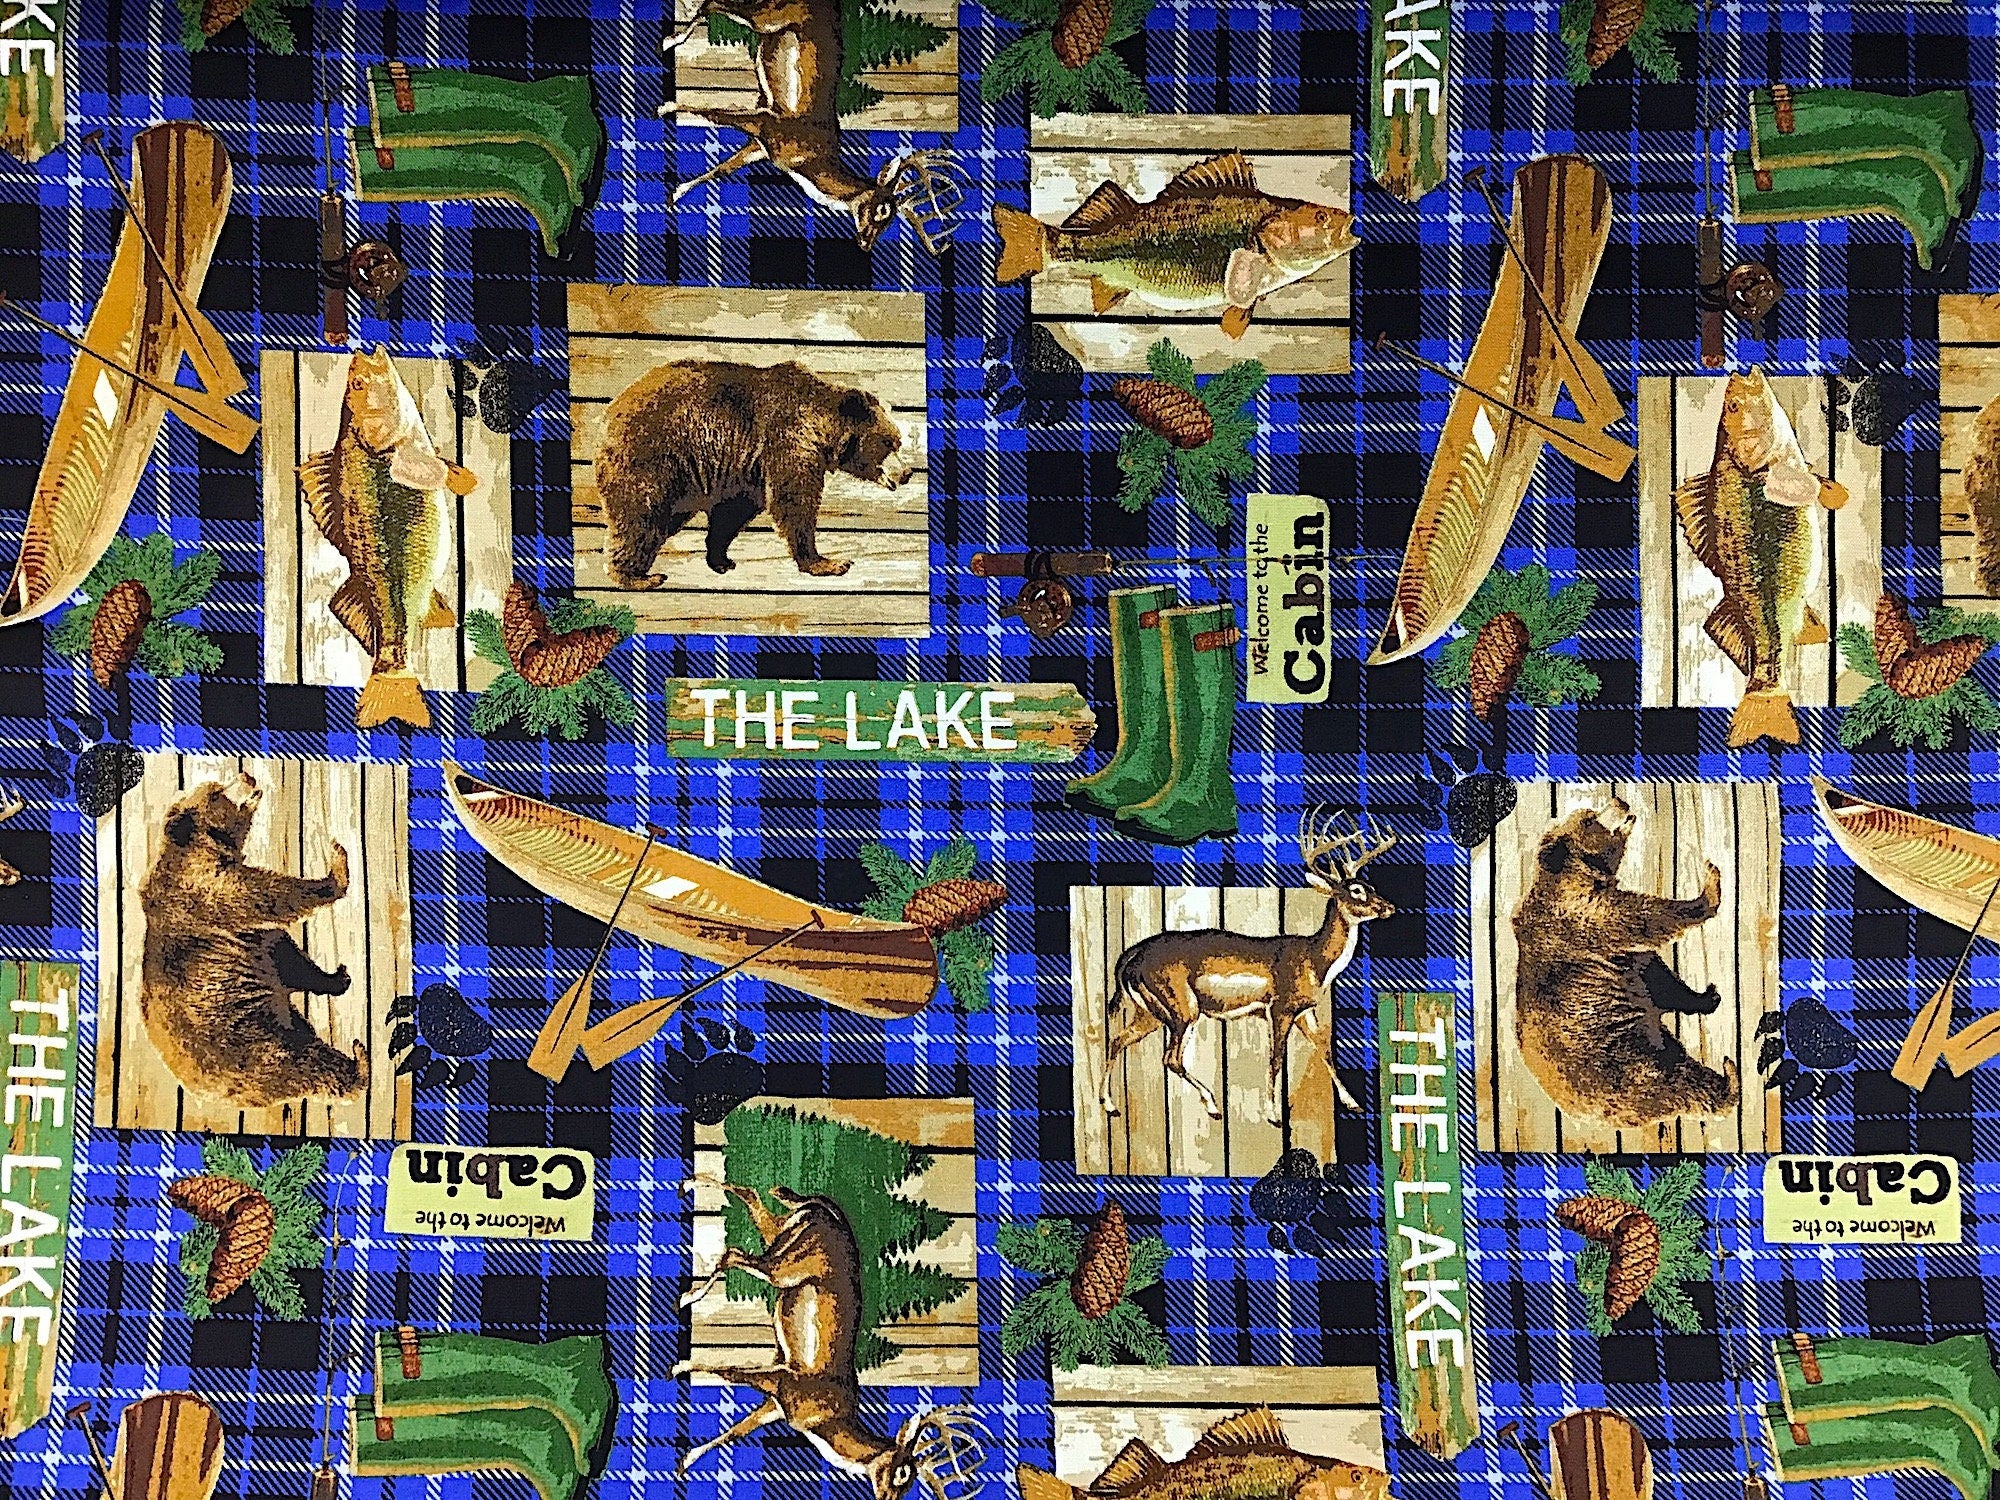 This fabric is called Lake House and is covered with canoe, bears, deer, fish pine cones and more. The background is a plaid design